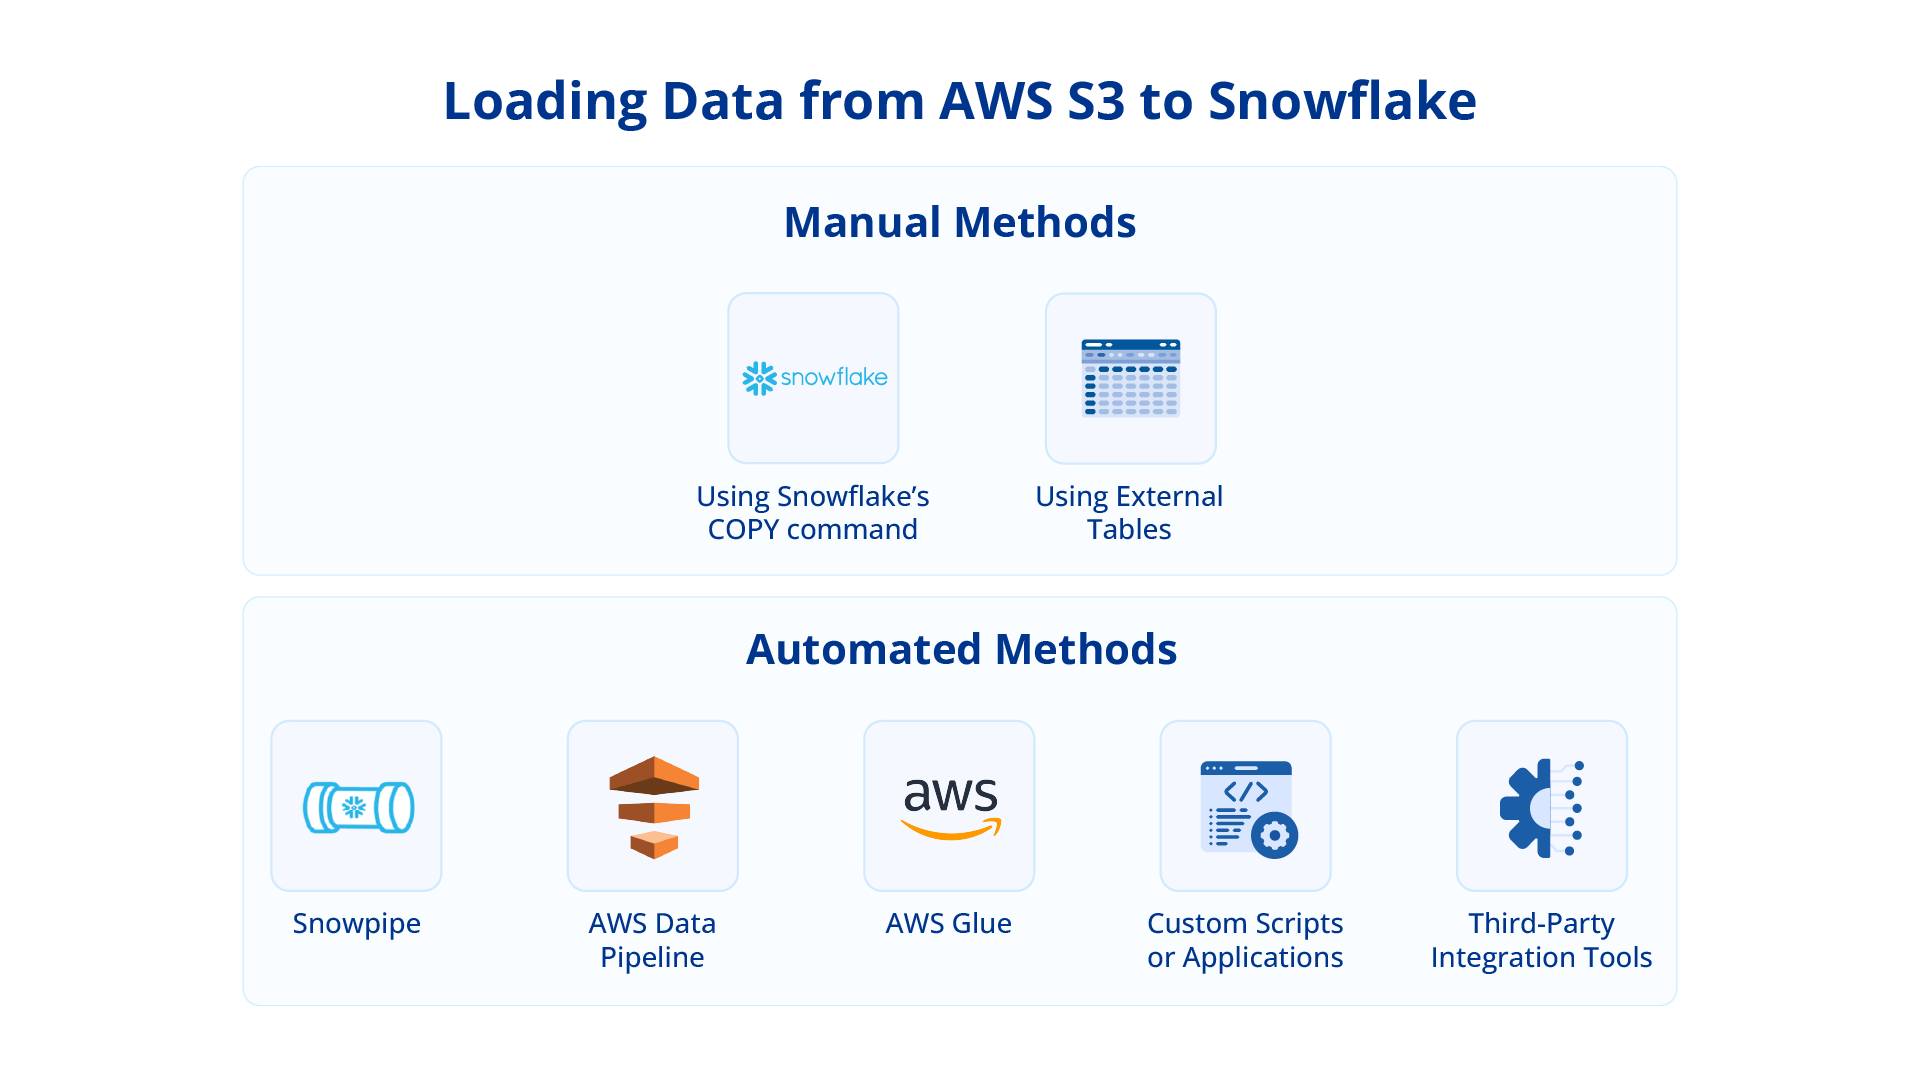 An image showing two kinds of methods for transferring data from AWS S3 to Snowflake.